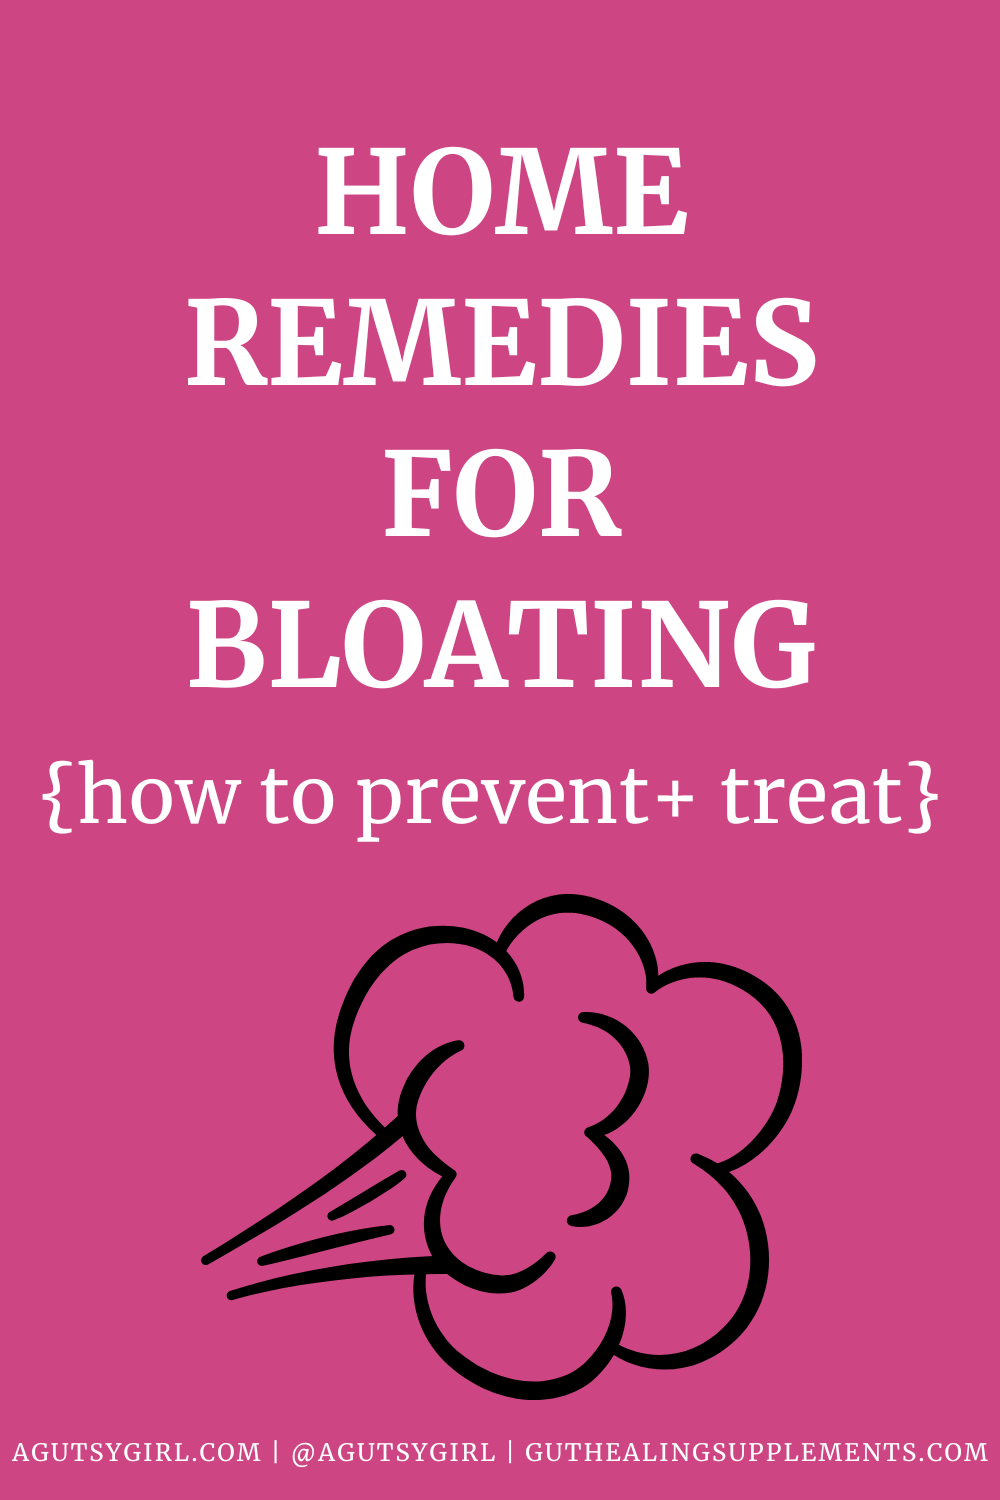 FABULOUS REMEDIES TO BEAT THE BLOAT